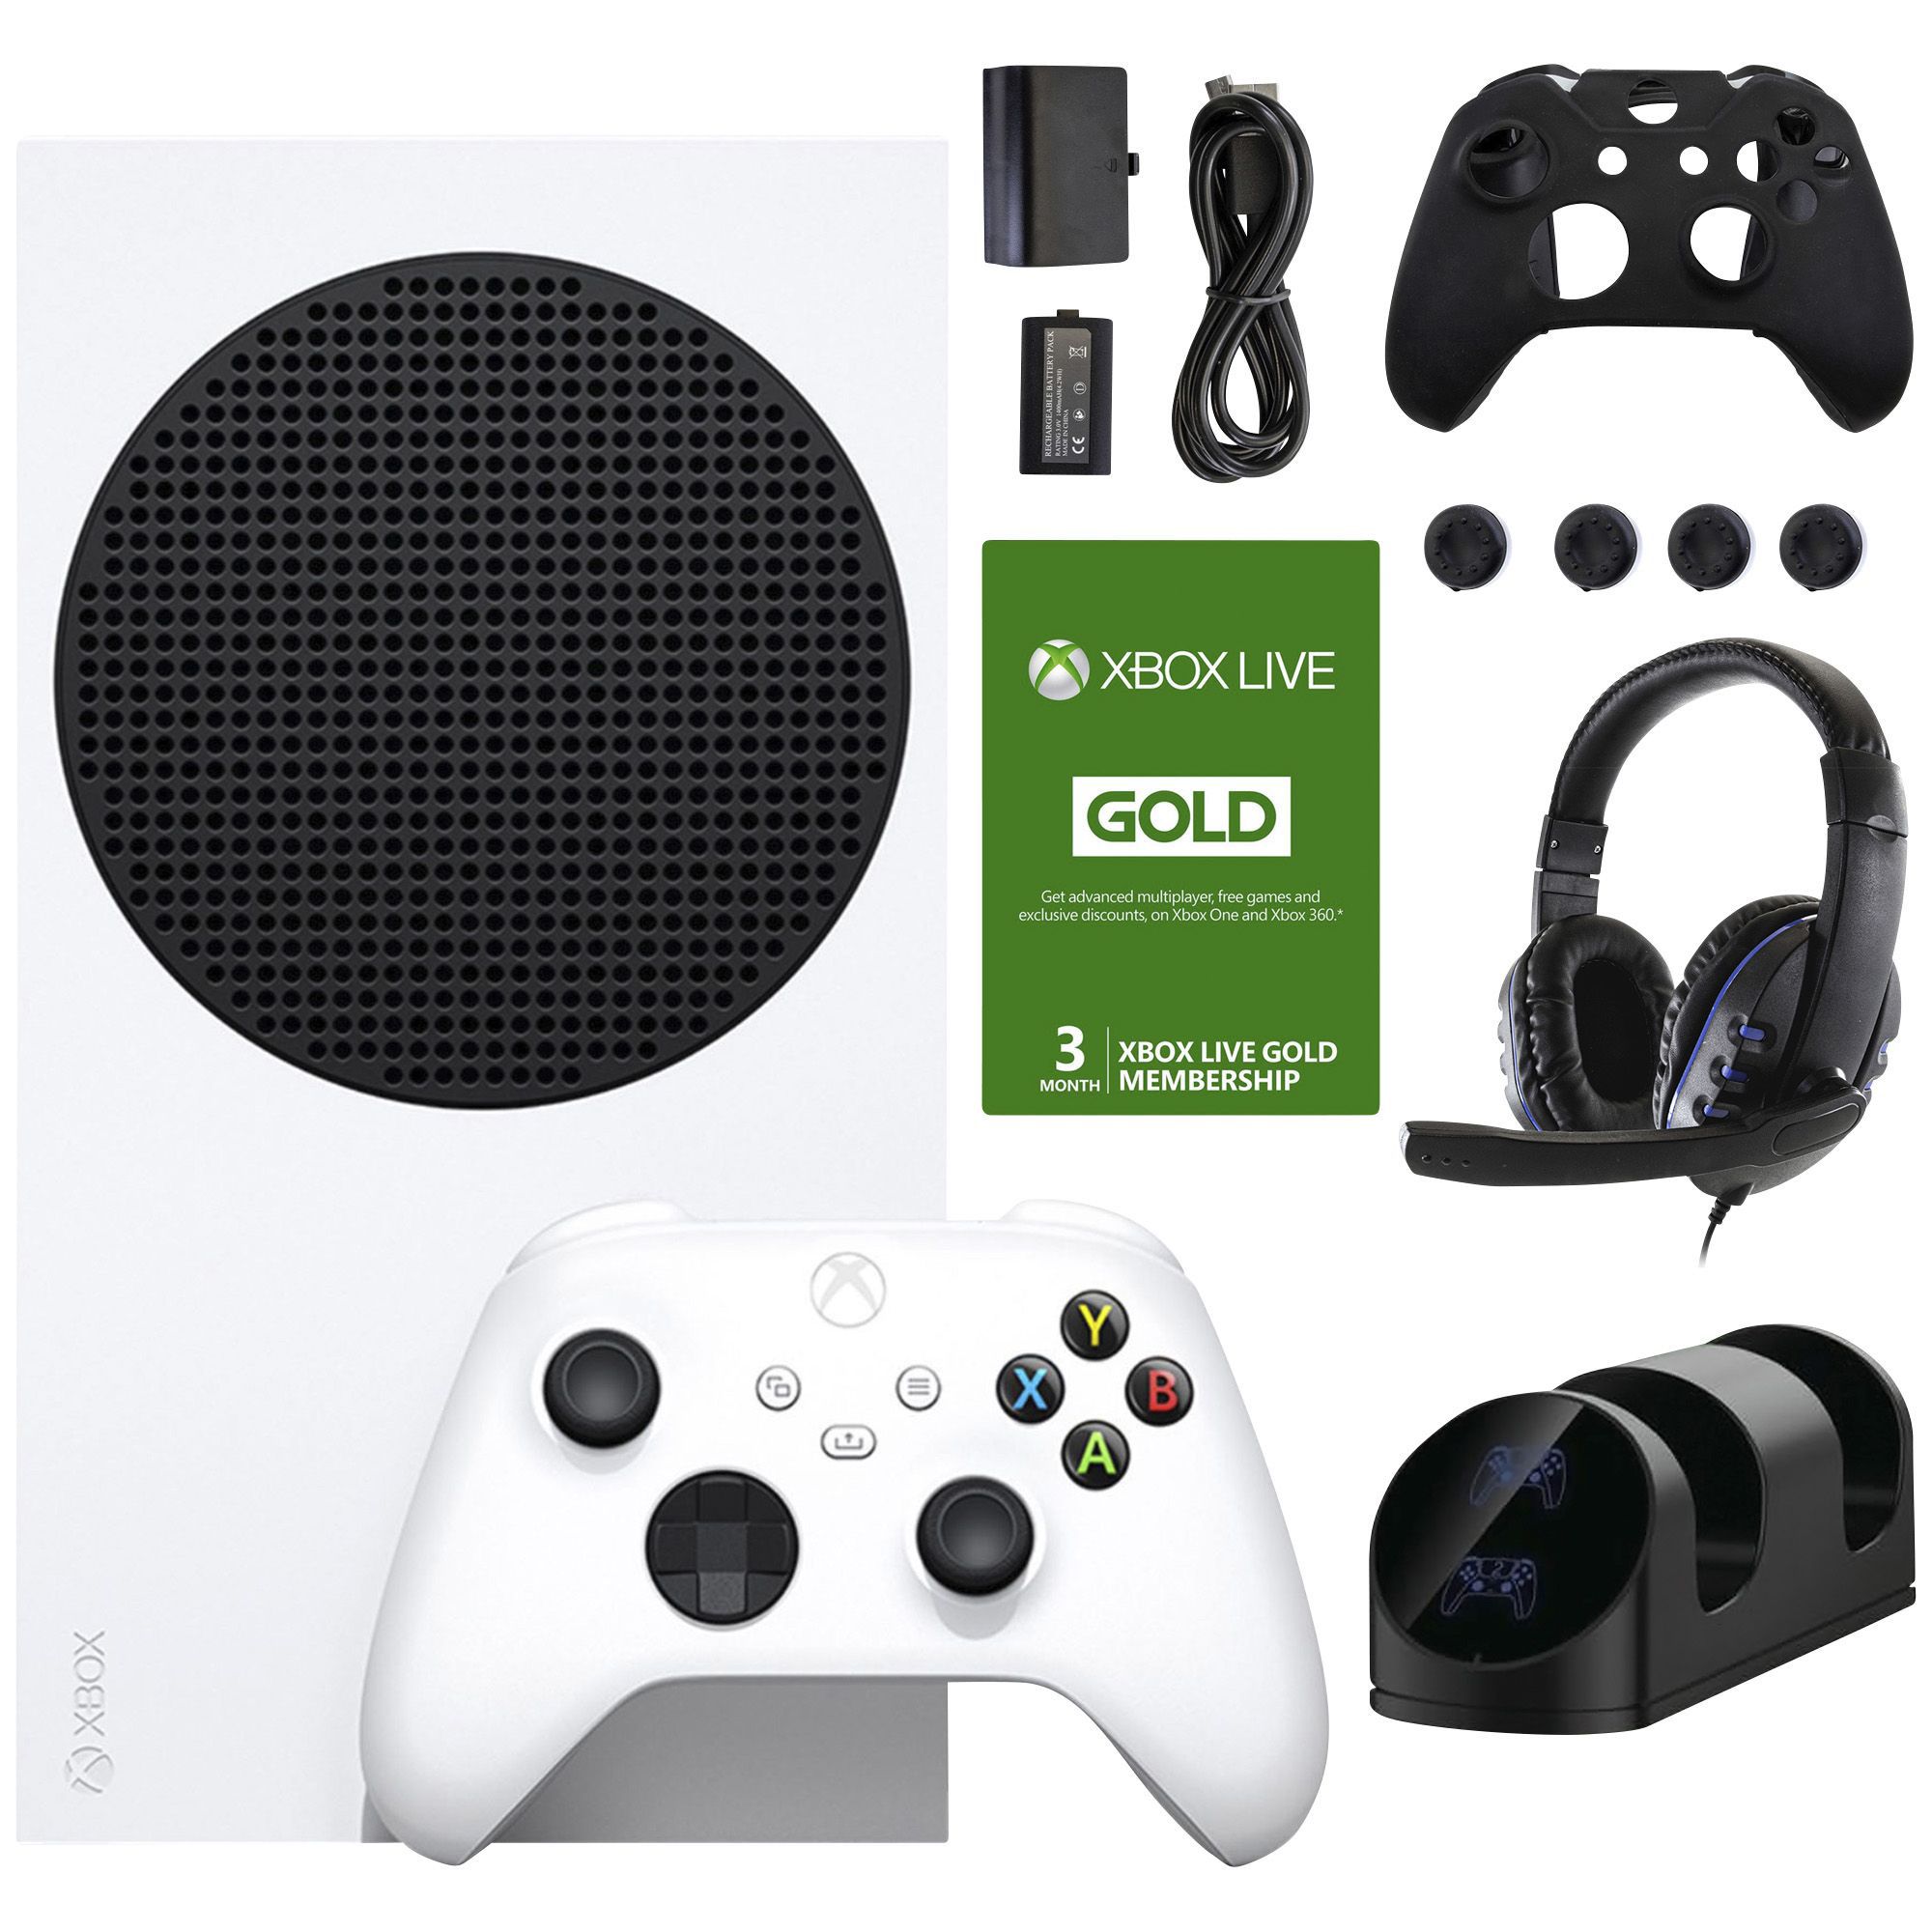 XBOXw/ Accessories + 3 Months XBOX Live (New/Sealed)